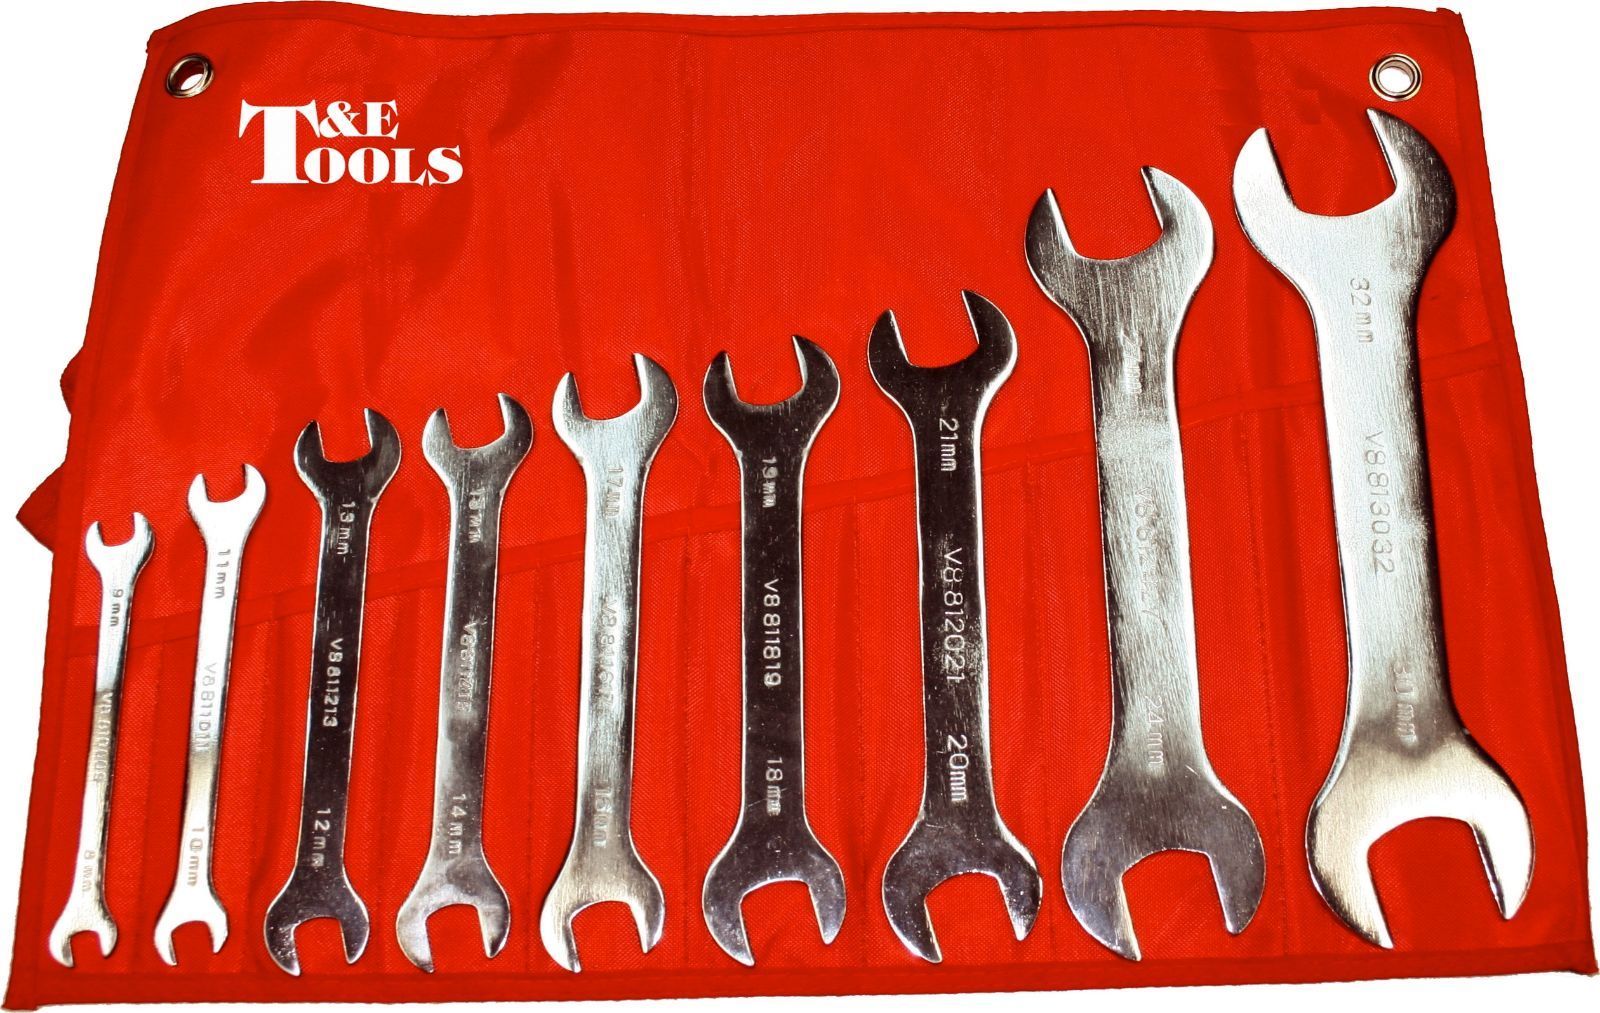 Imperial Super Thin Open End spanner Wrench set 8 Piece T&E tools new 99308